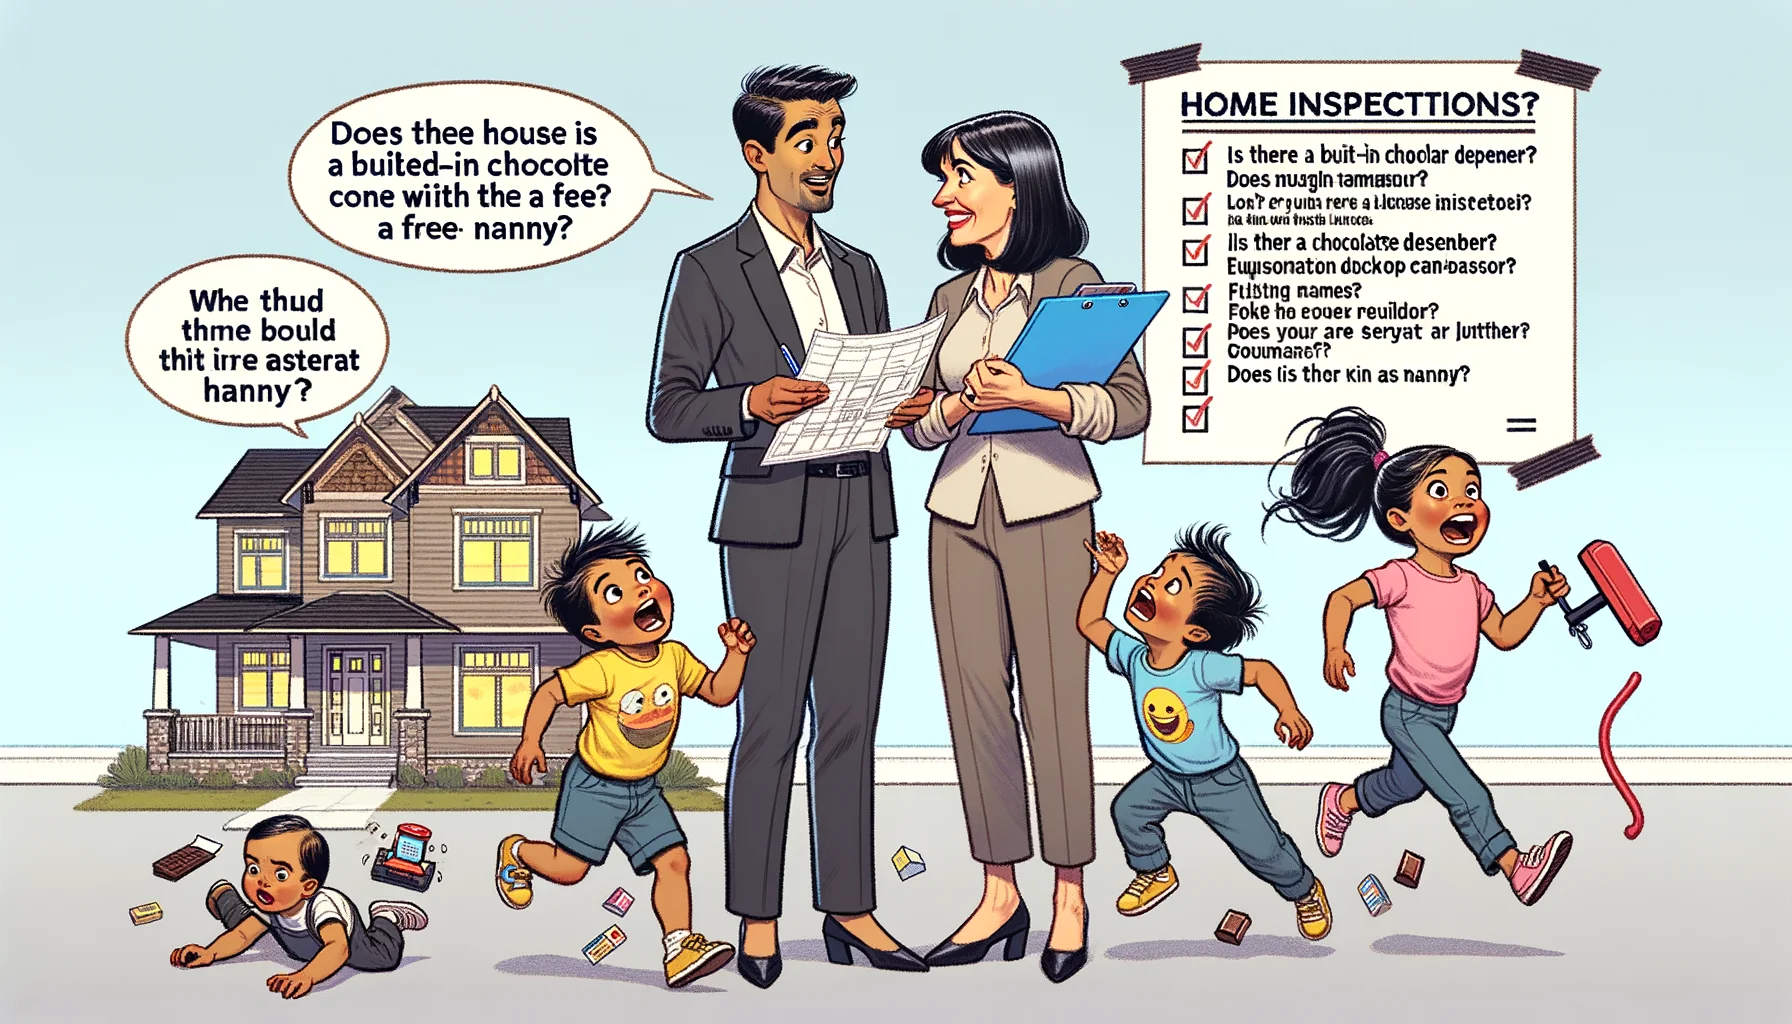 Create a humorous scene depicting the reality of home buying as a single parent. In the image, there is a single-parent of Hispanic descent, with two lively children, both of different genders, running around causing playful chaos. The mother is standing with a real estate agent of South Asian descent, holding a blueprint of the house, both sharing an amused smile as they look at the children. In one corner, the home inspection checklist has funny items like 'Is there a built-in chocolate dispenser?' and 'Does the house come with a free nanny?'